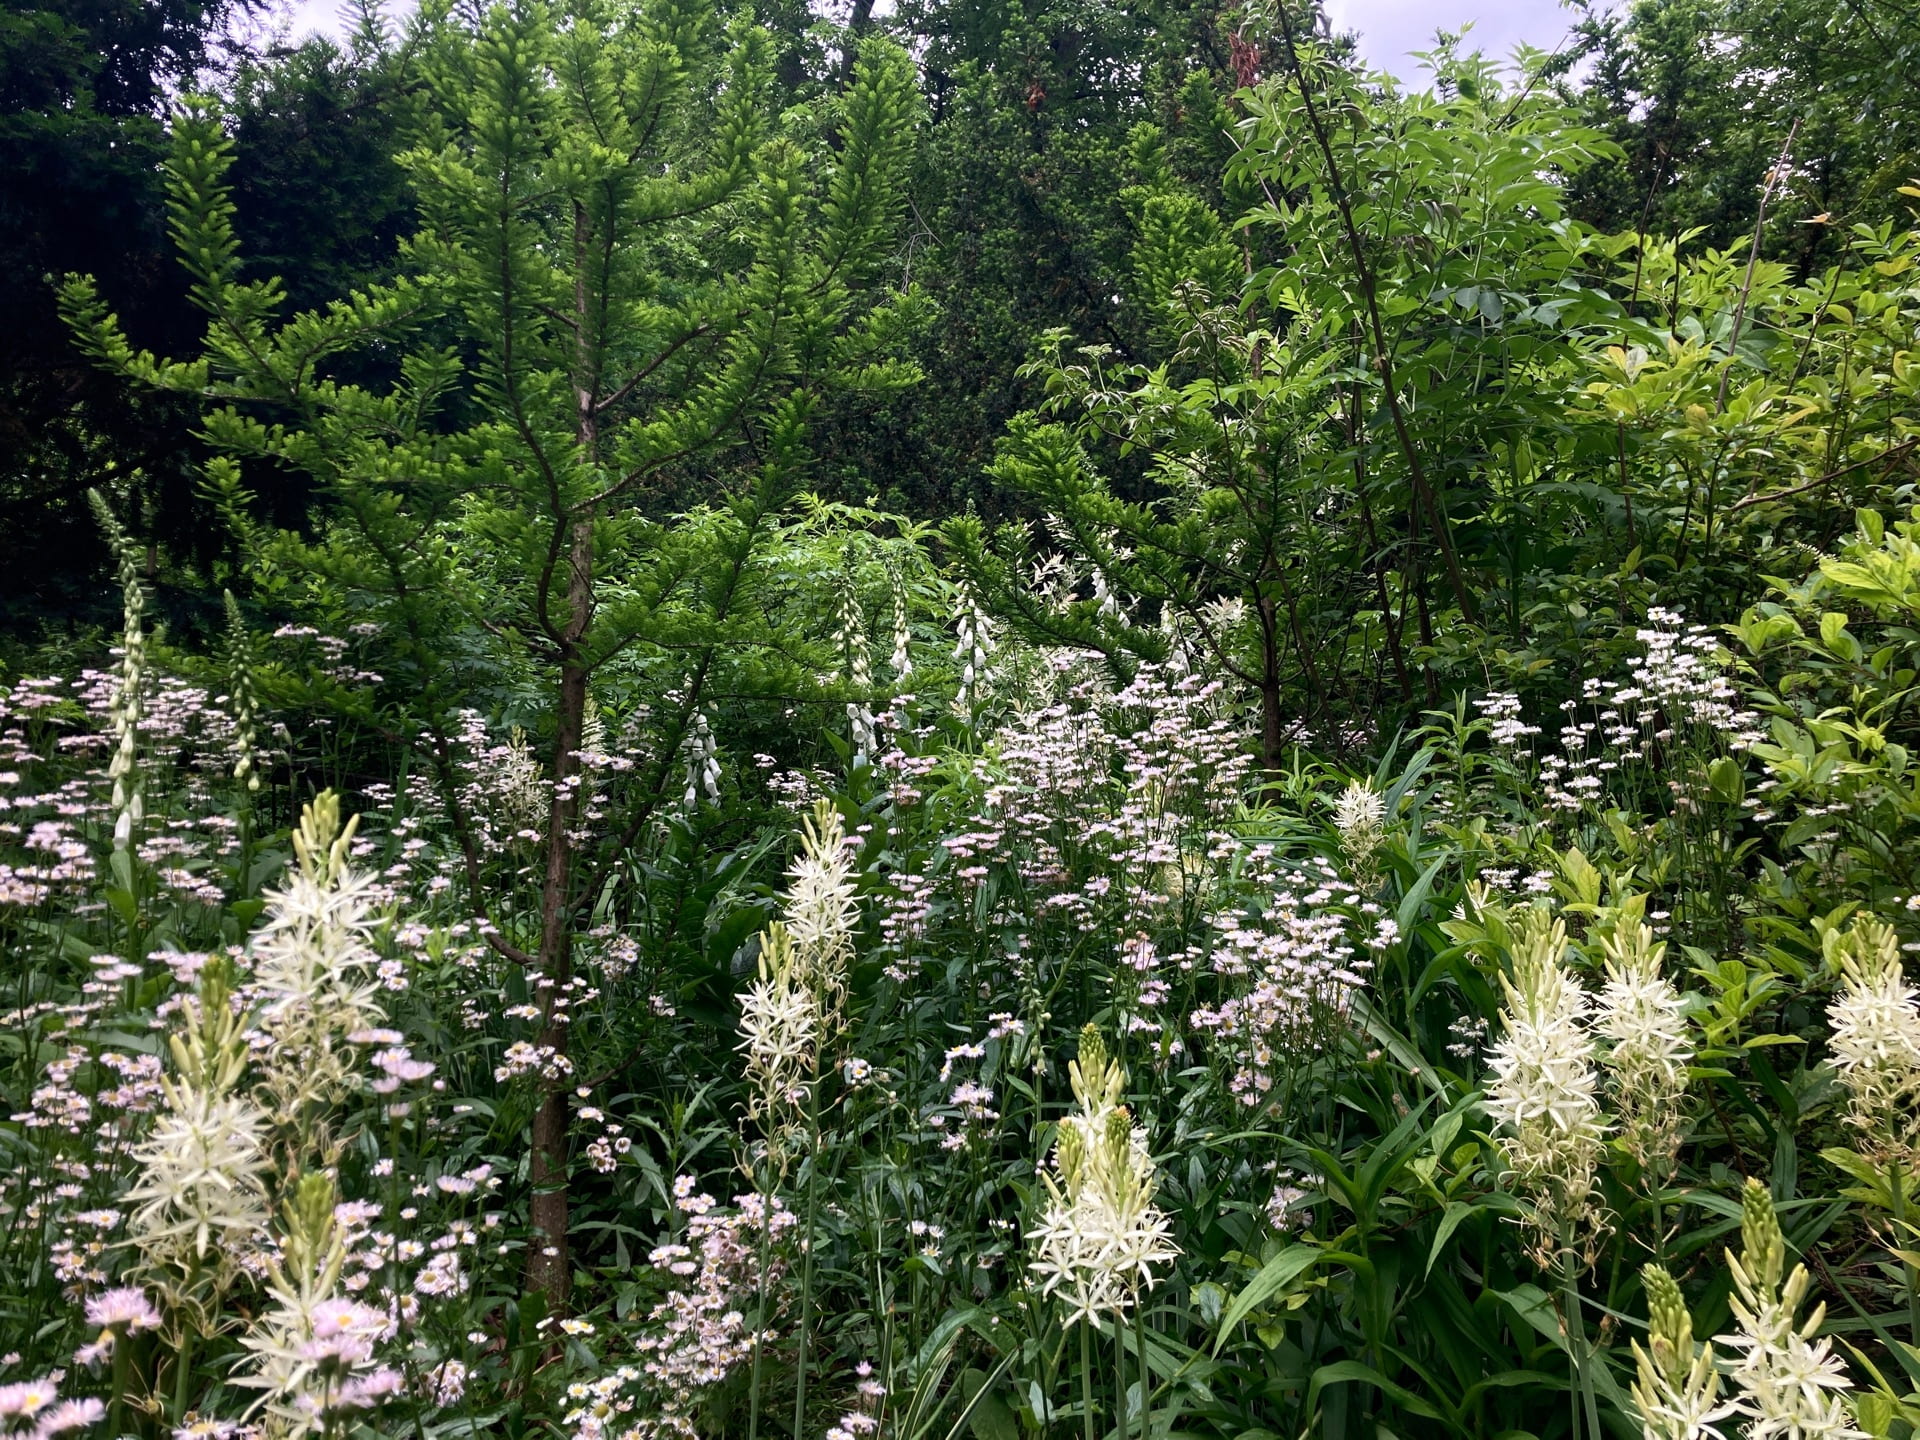 Quamash, fleabane, and foxgloves mingle to create a white frothy planting palette at the Pond.